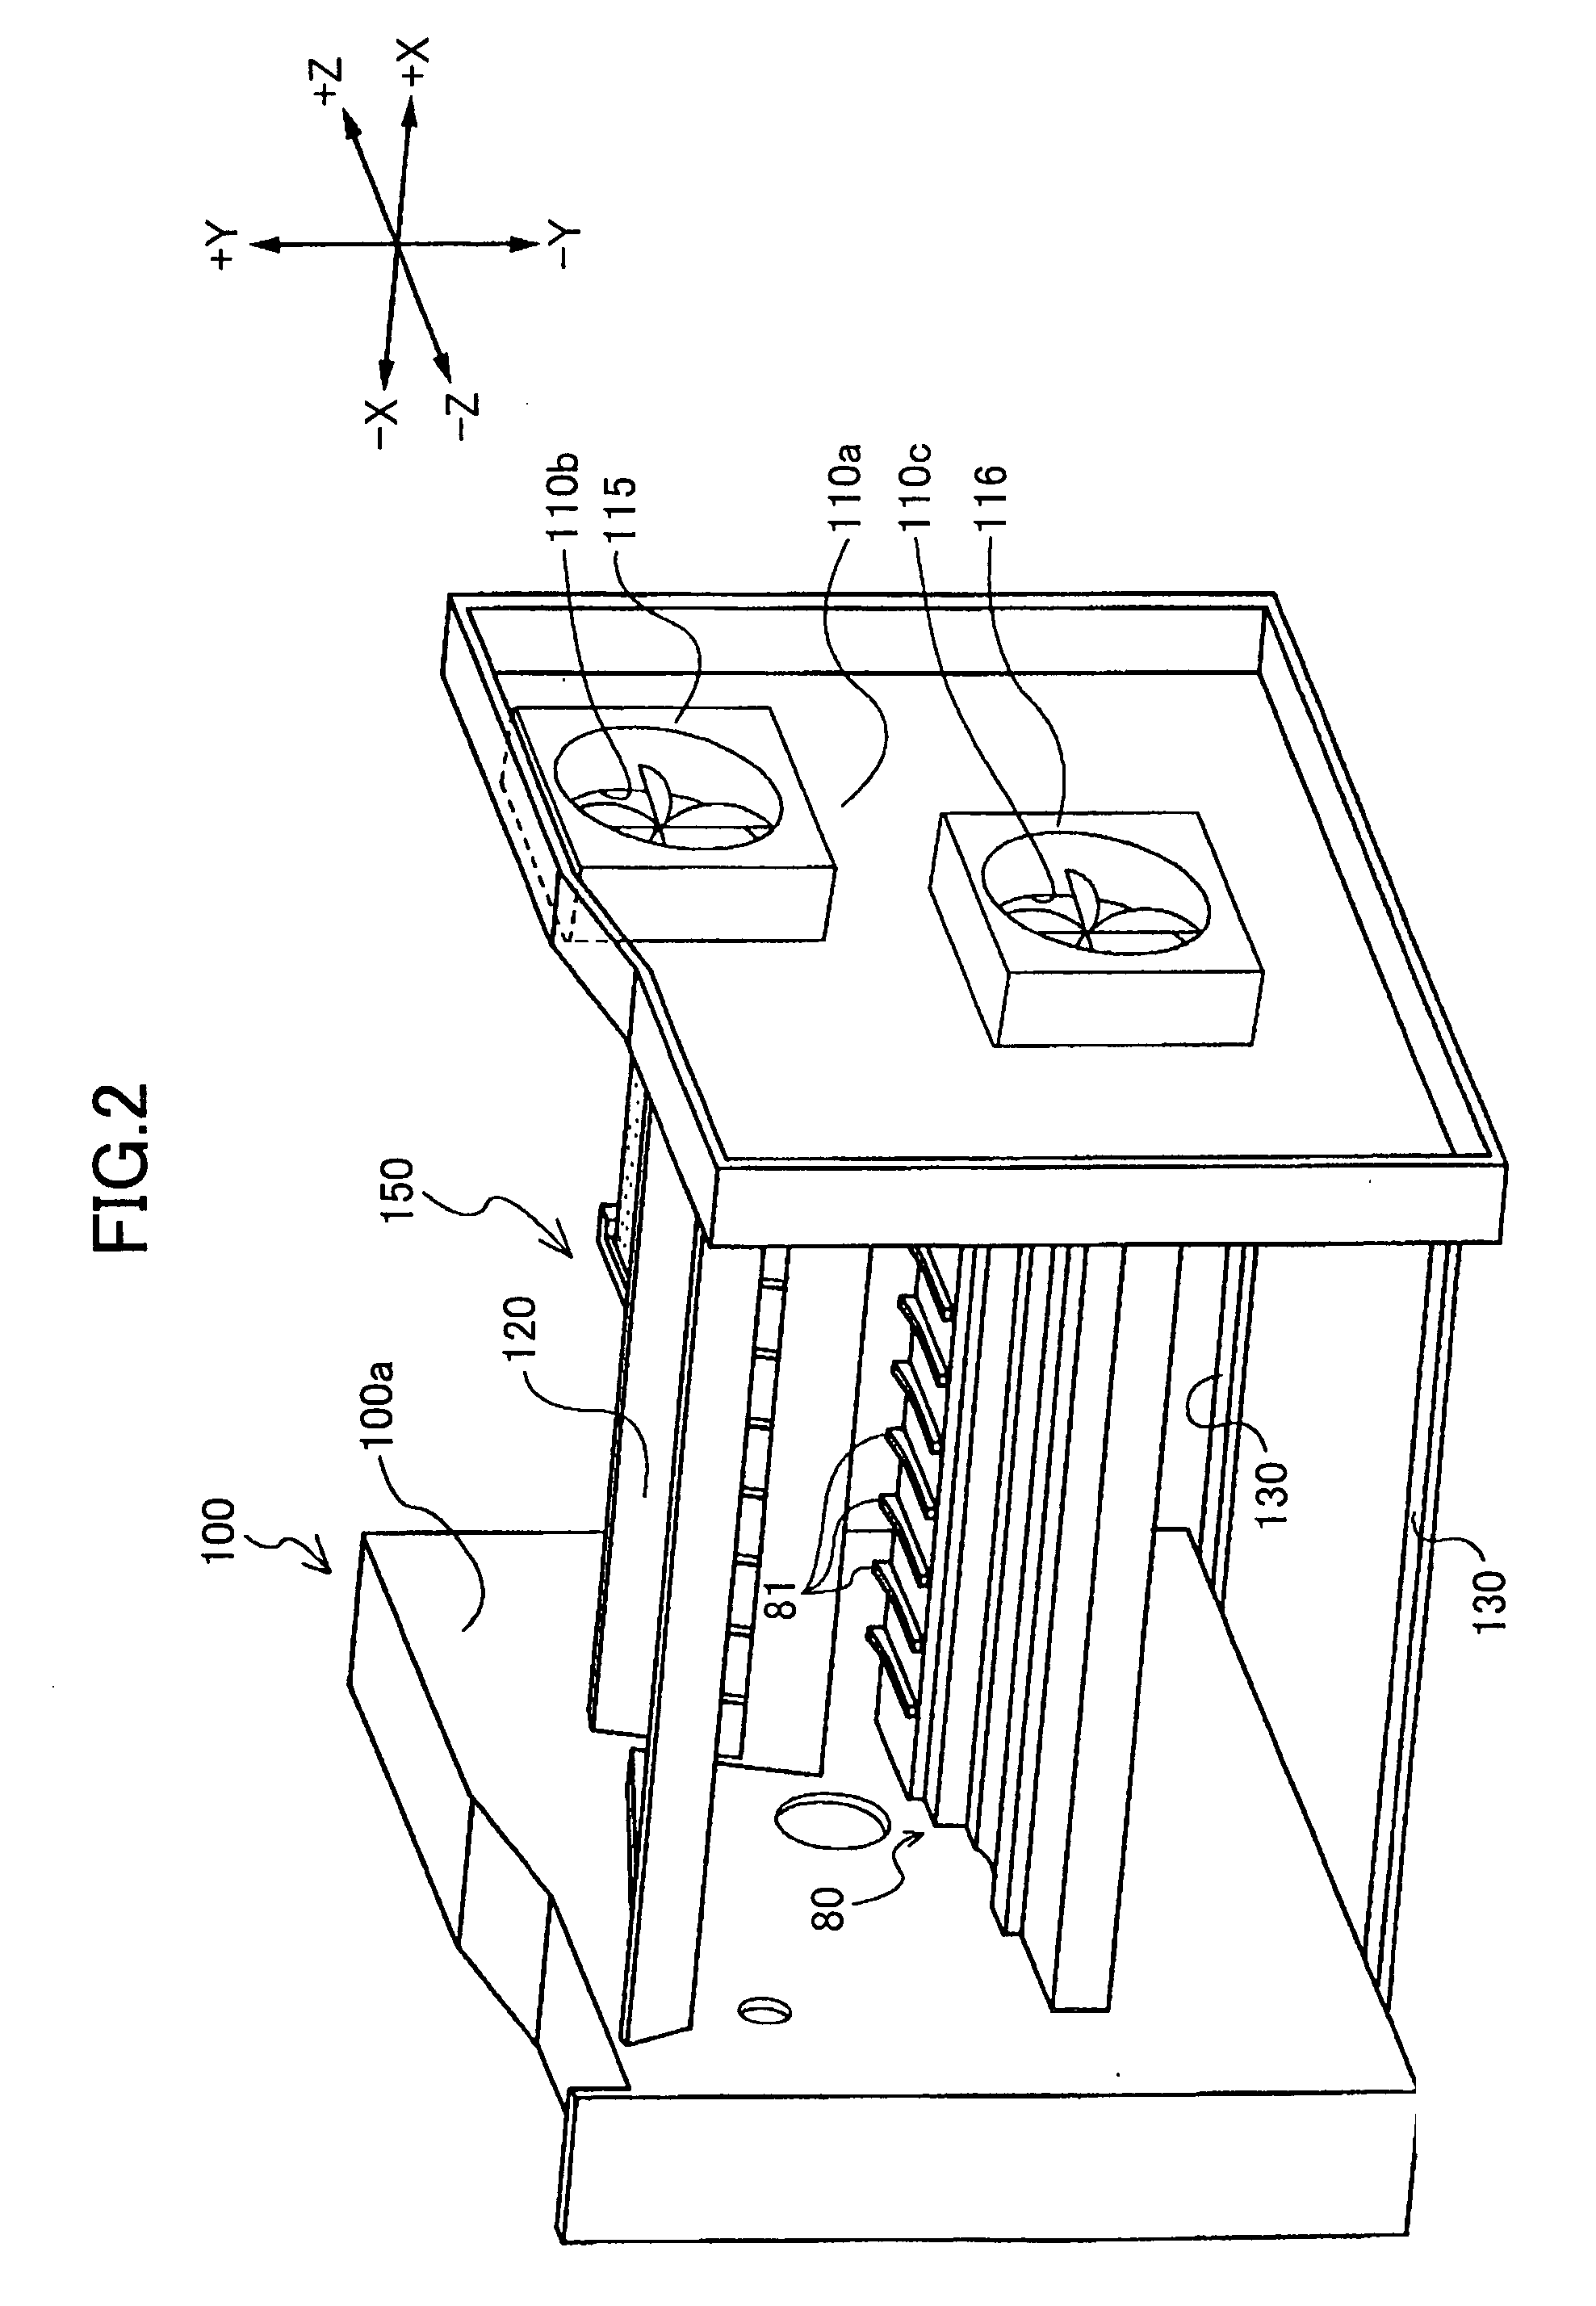 Exhaust system of image forming device